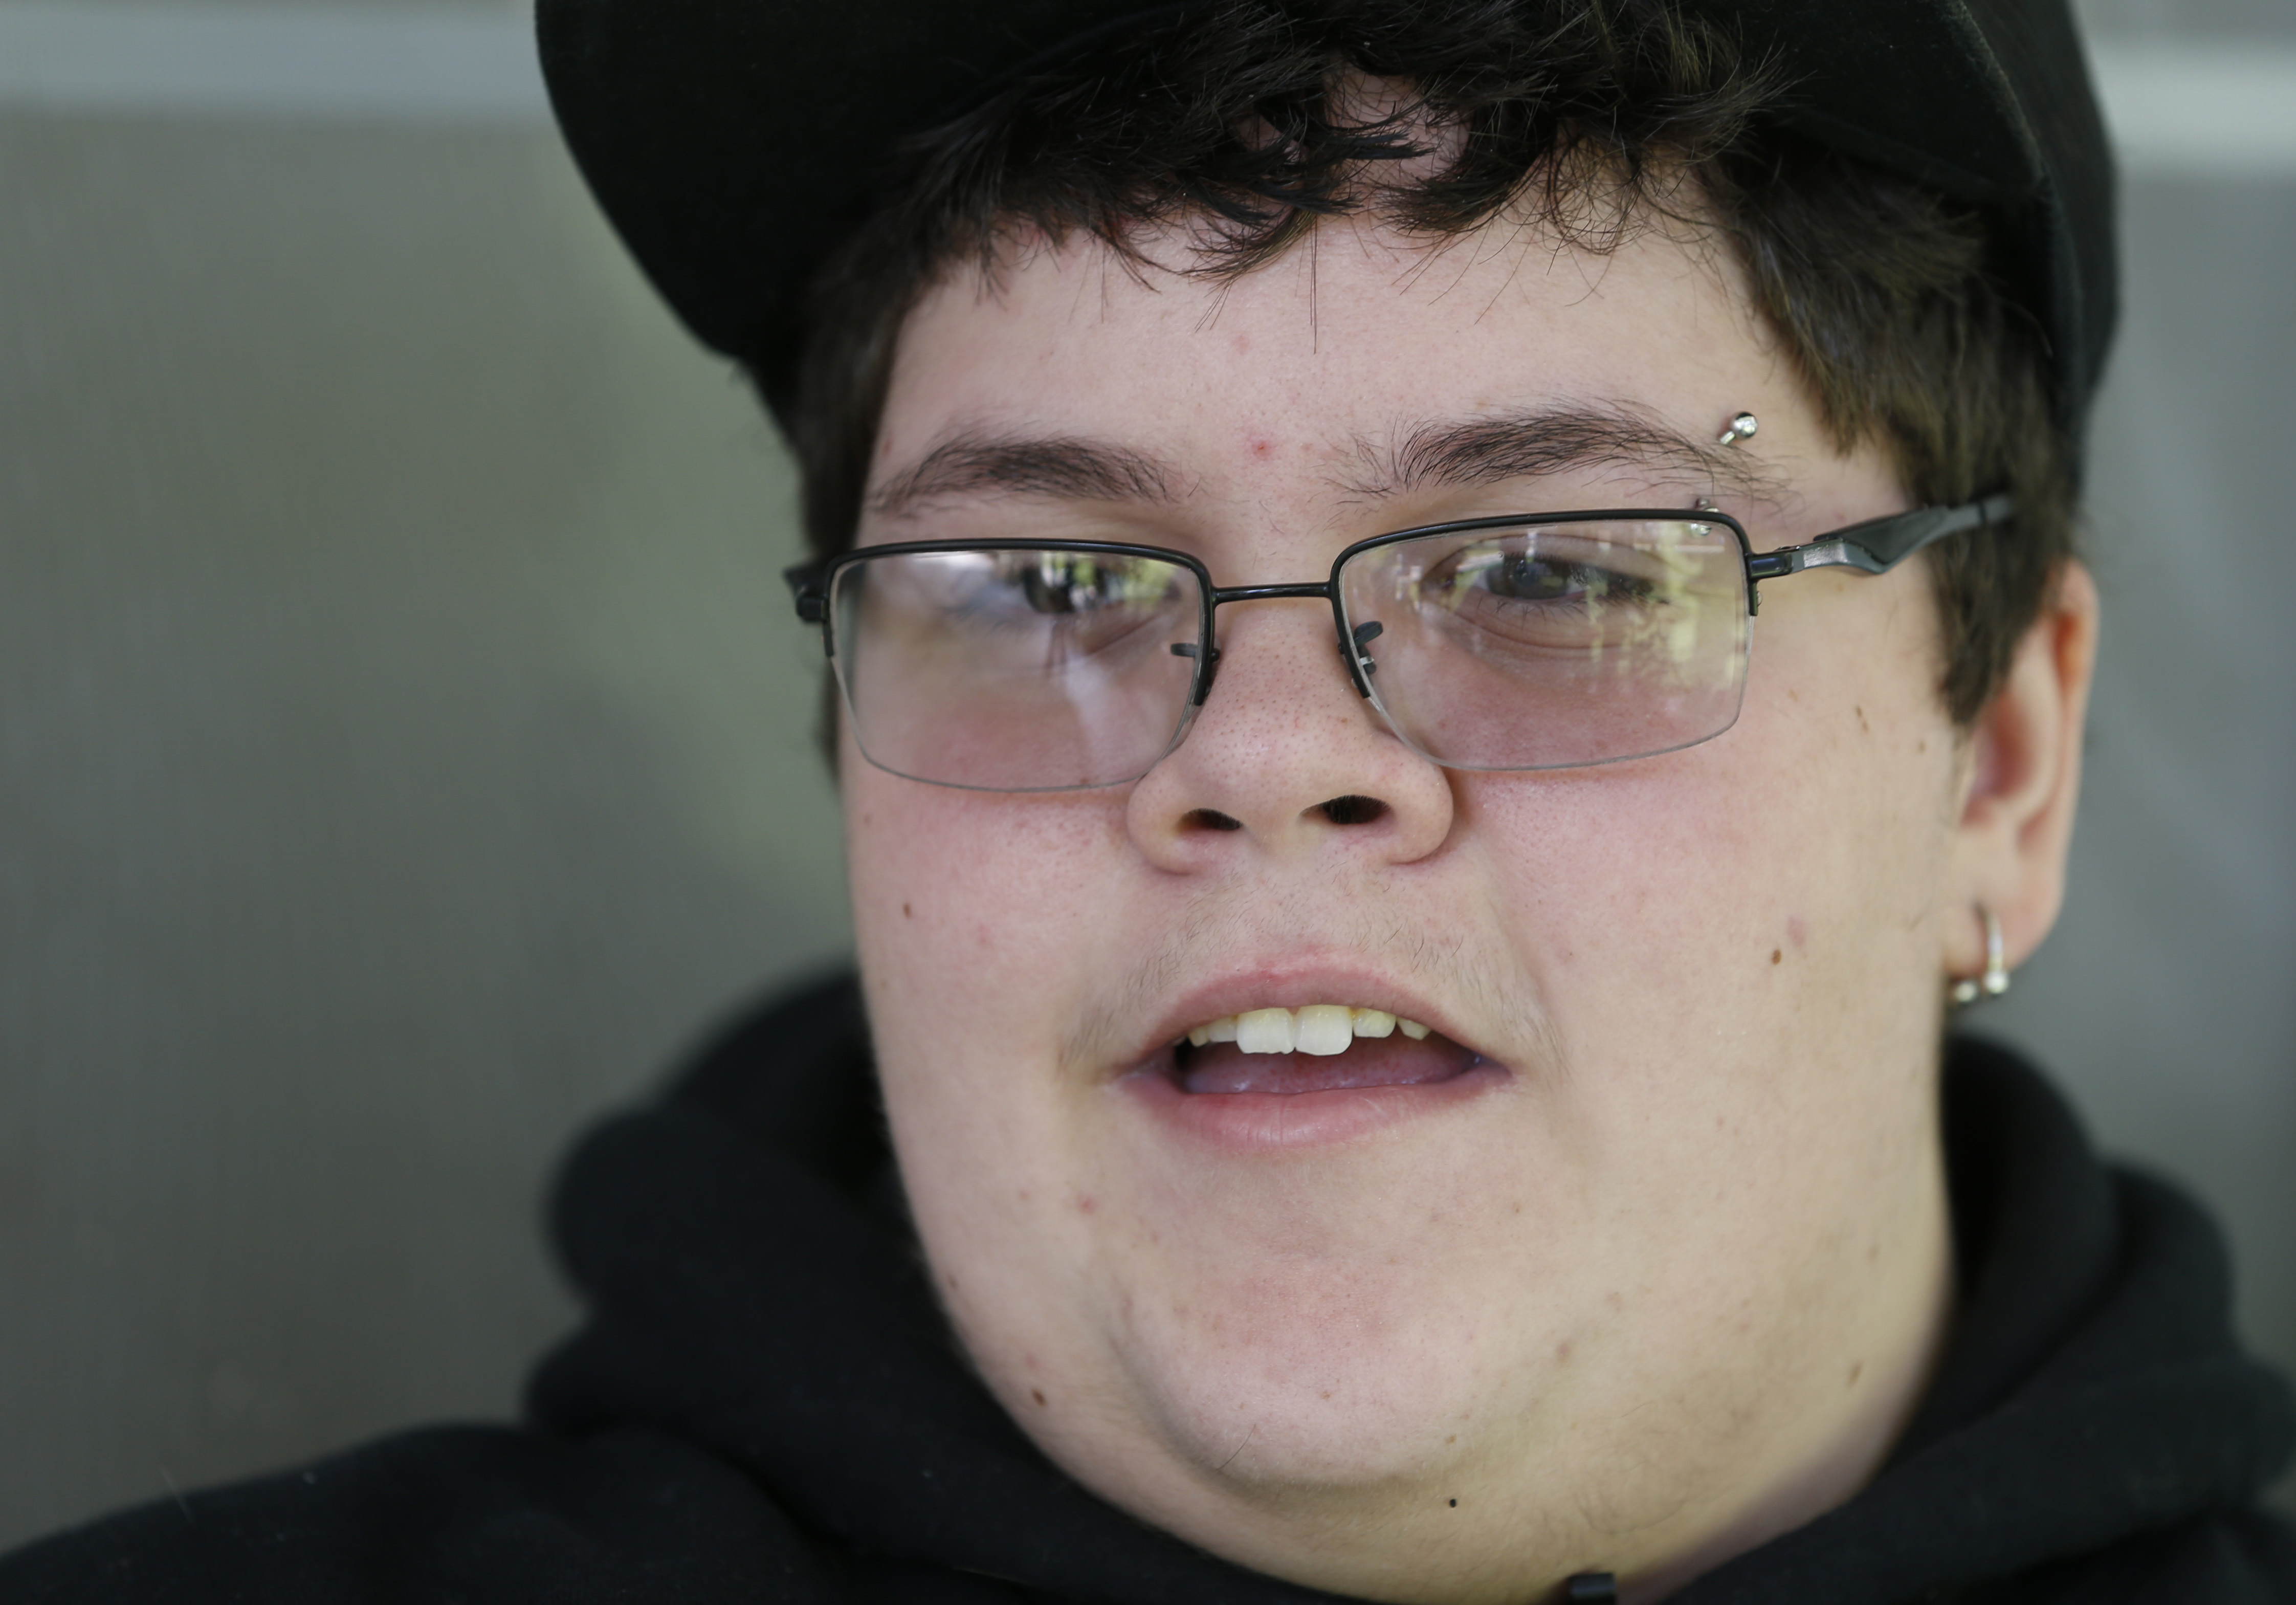 Gavin Grimm, a transgender student, speaks during an interview at his home in Gloucester, Va., in 2015. (Steve Helber, Associated Press)